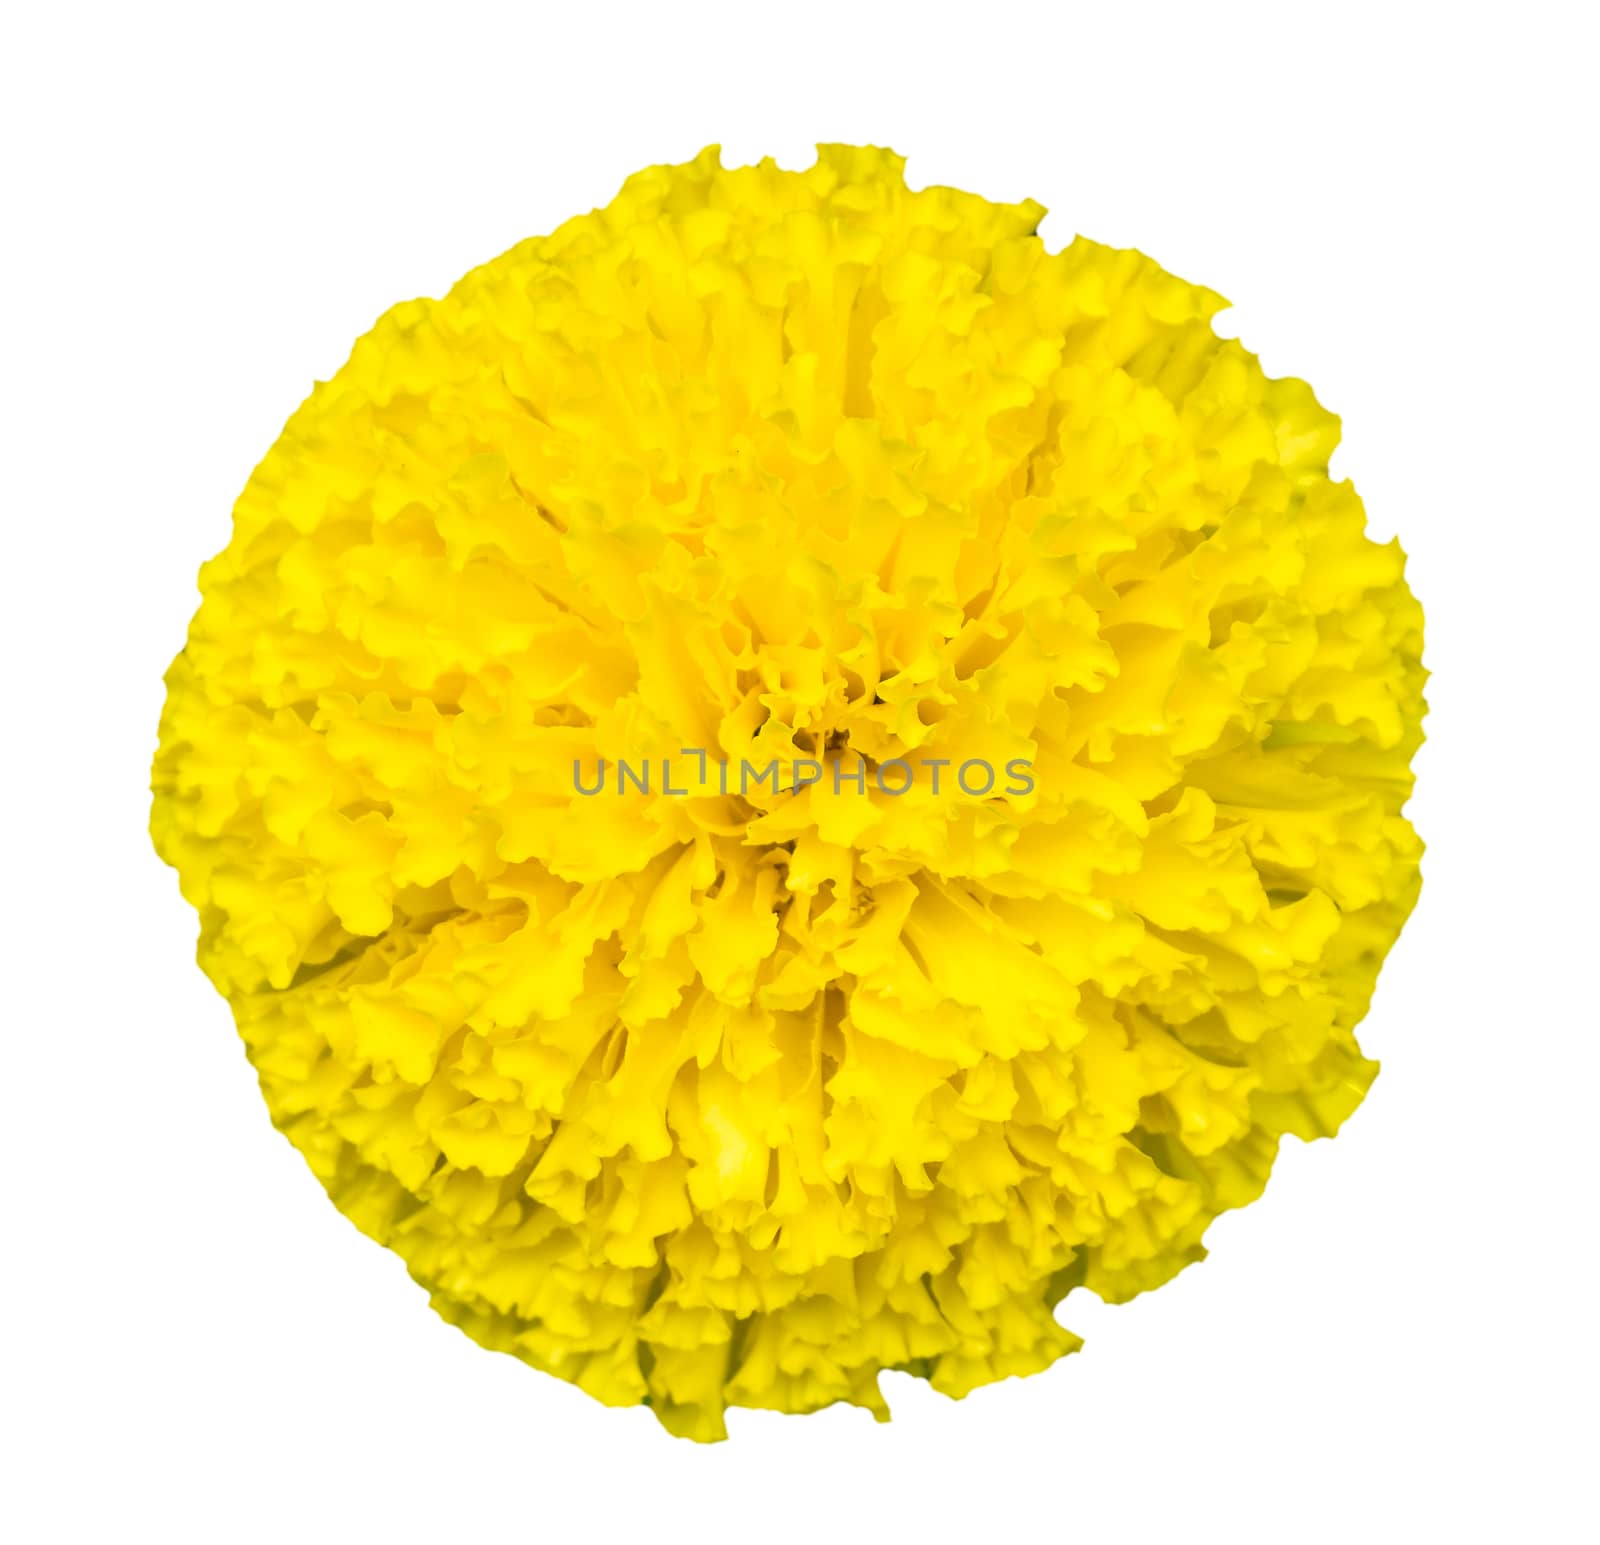 Top view of beautiful isolated marigold flowers.(Tagetes erecta)